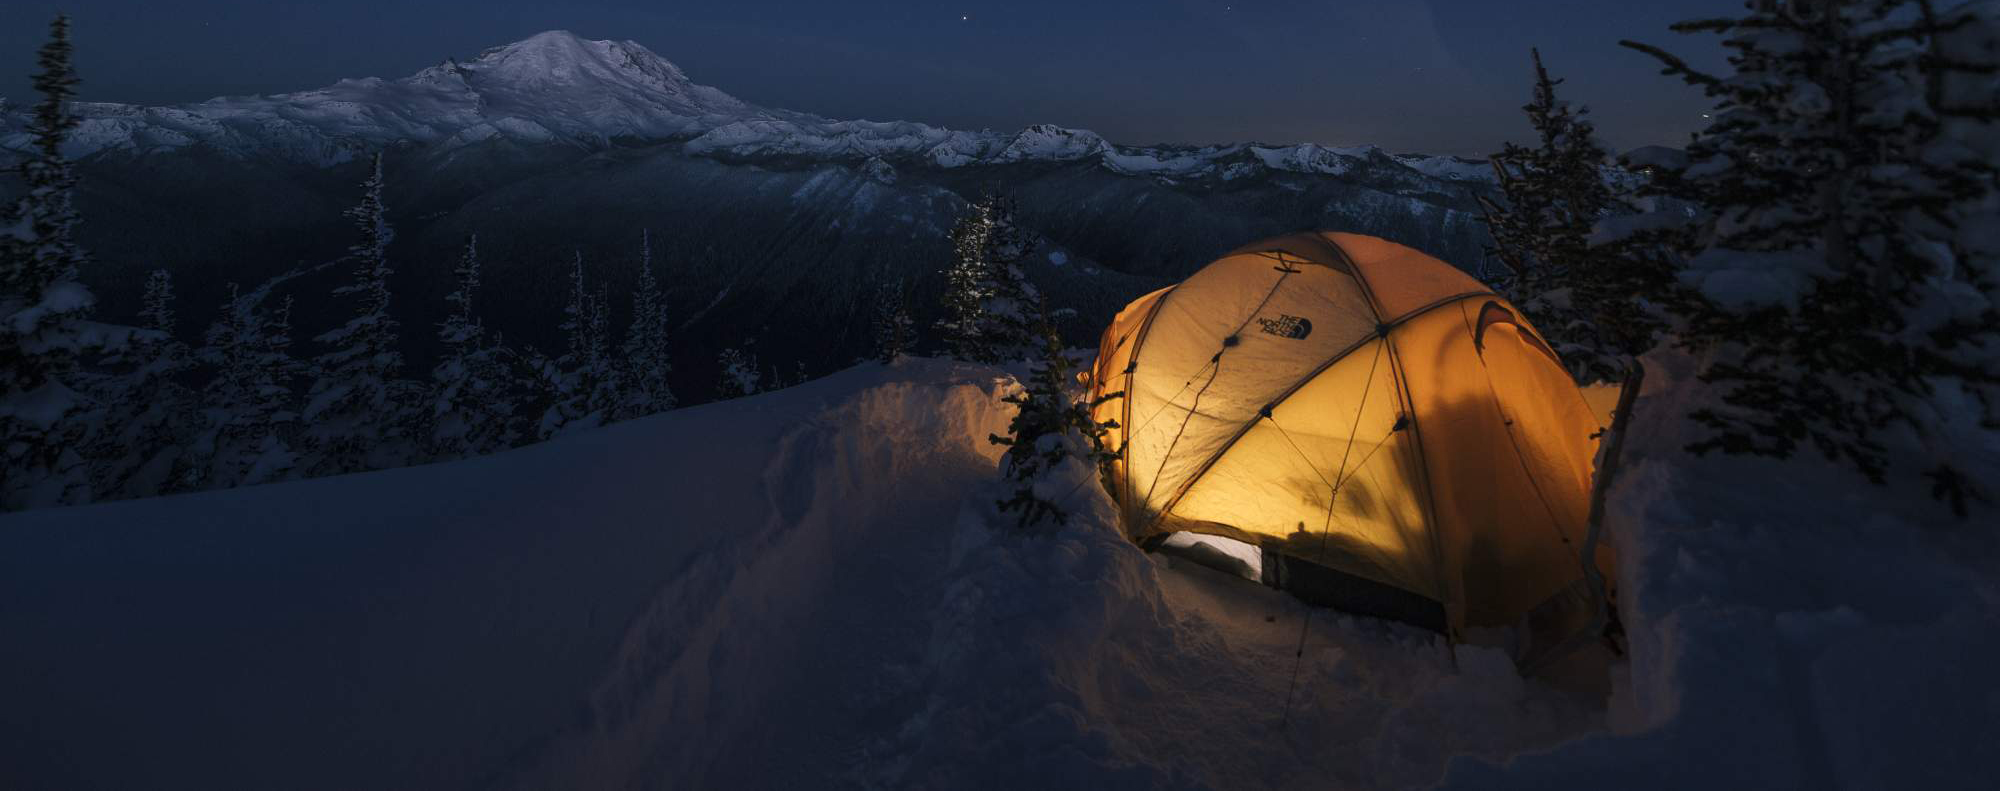 The 5 Best Backpacking Tents for Your Next Adventure   REI